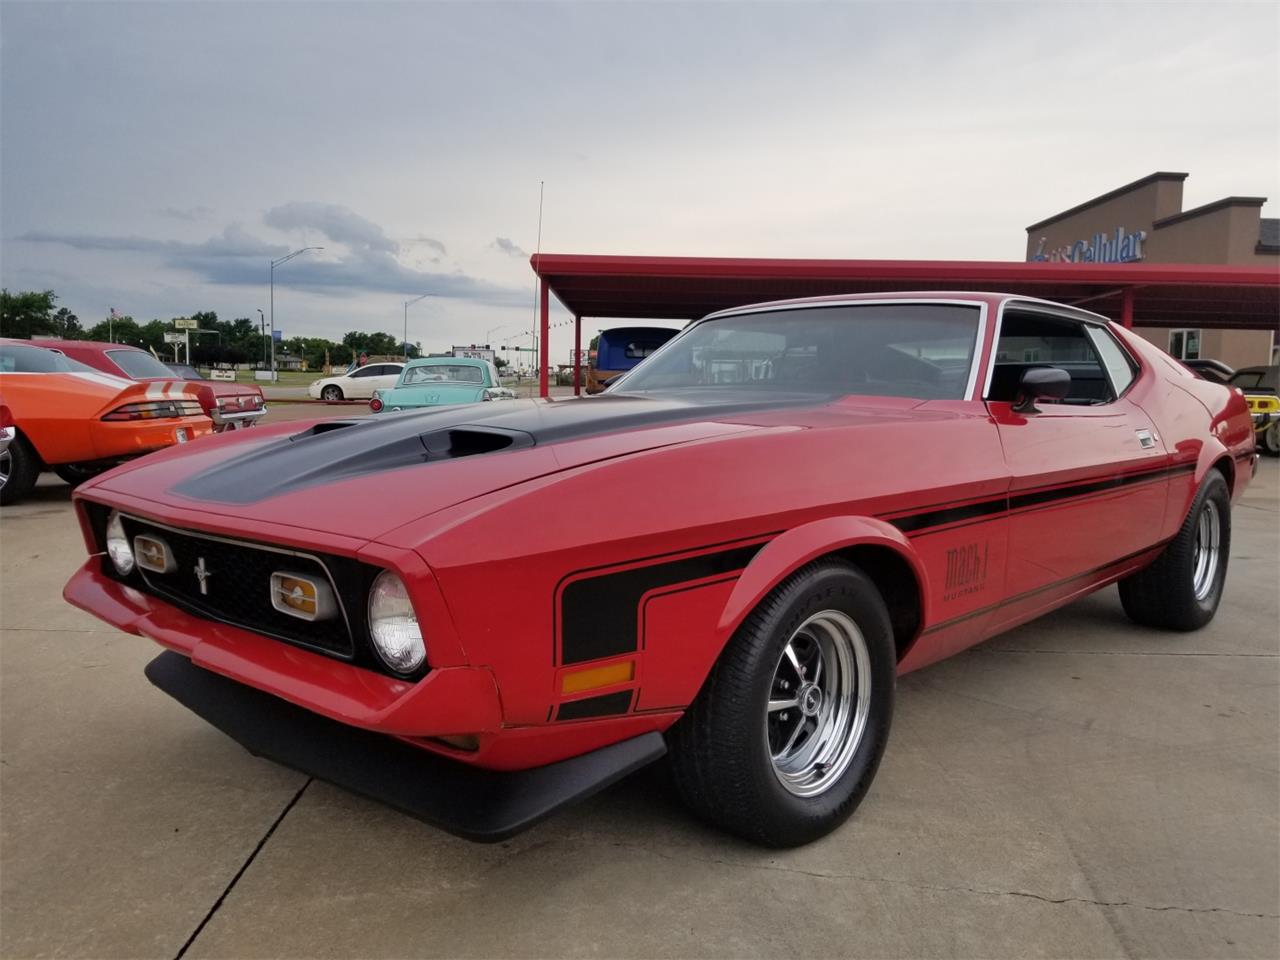 1972 Ford Mustang Mach 1 for Sale | ClassicCars.com | CC-1102899